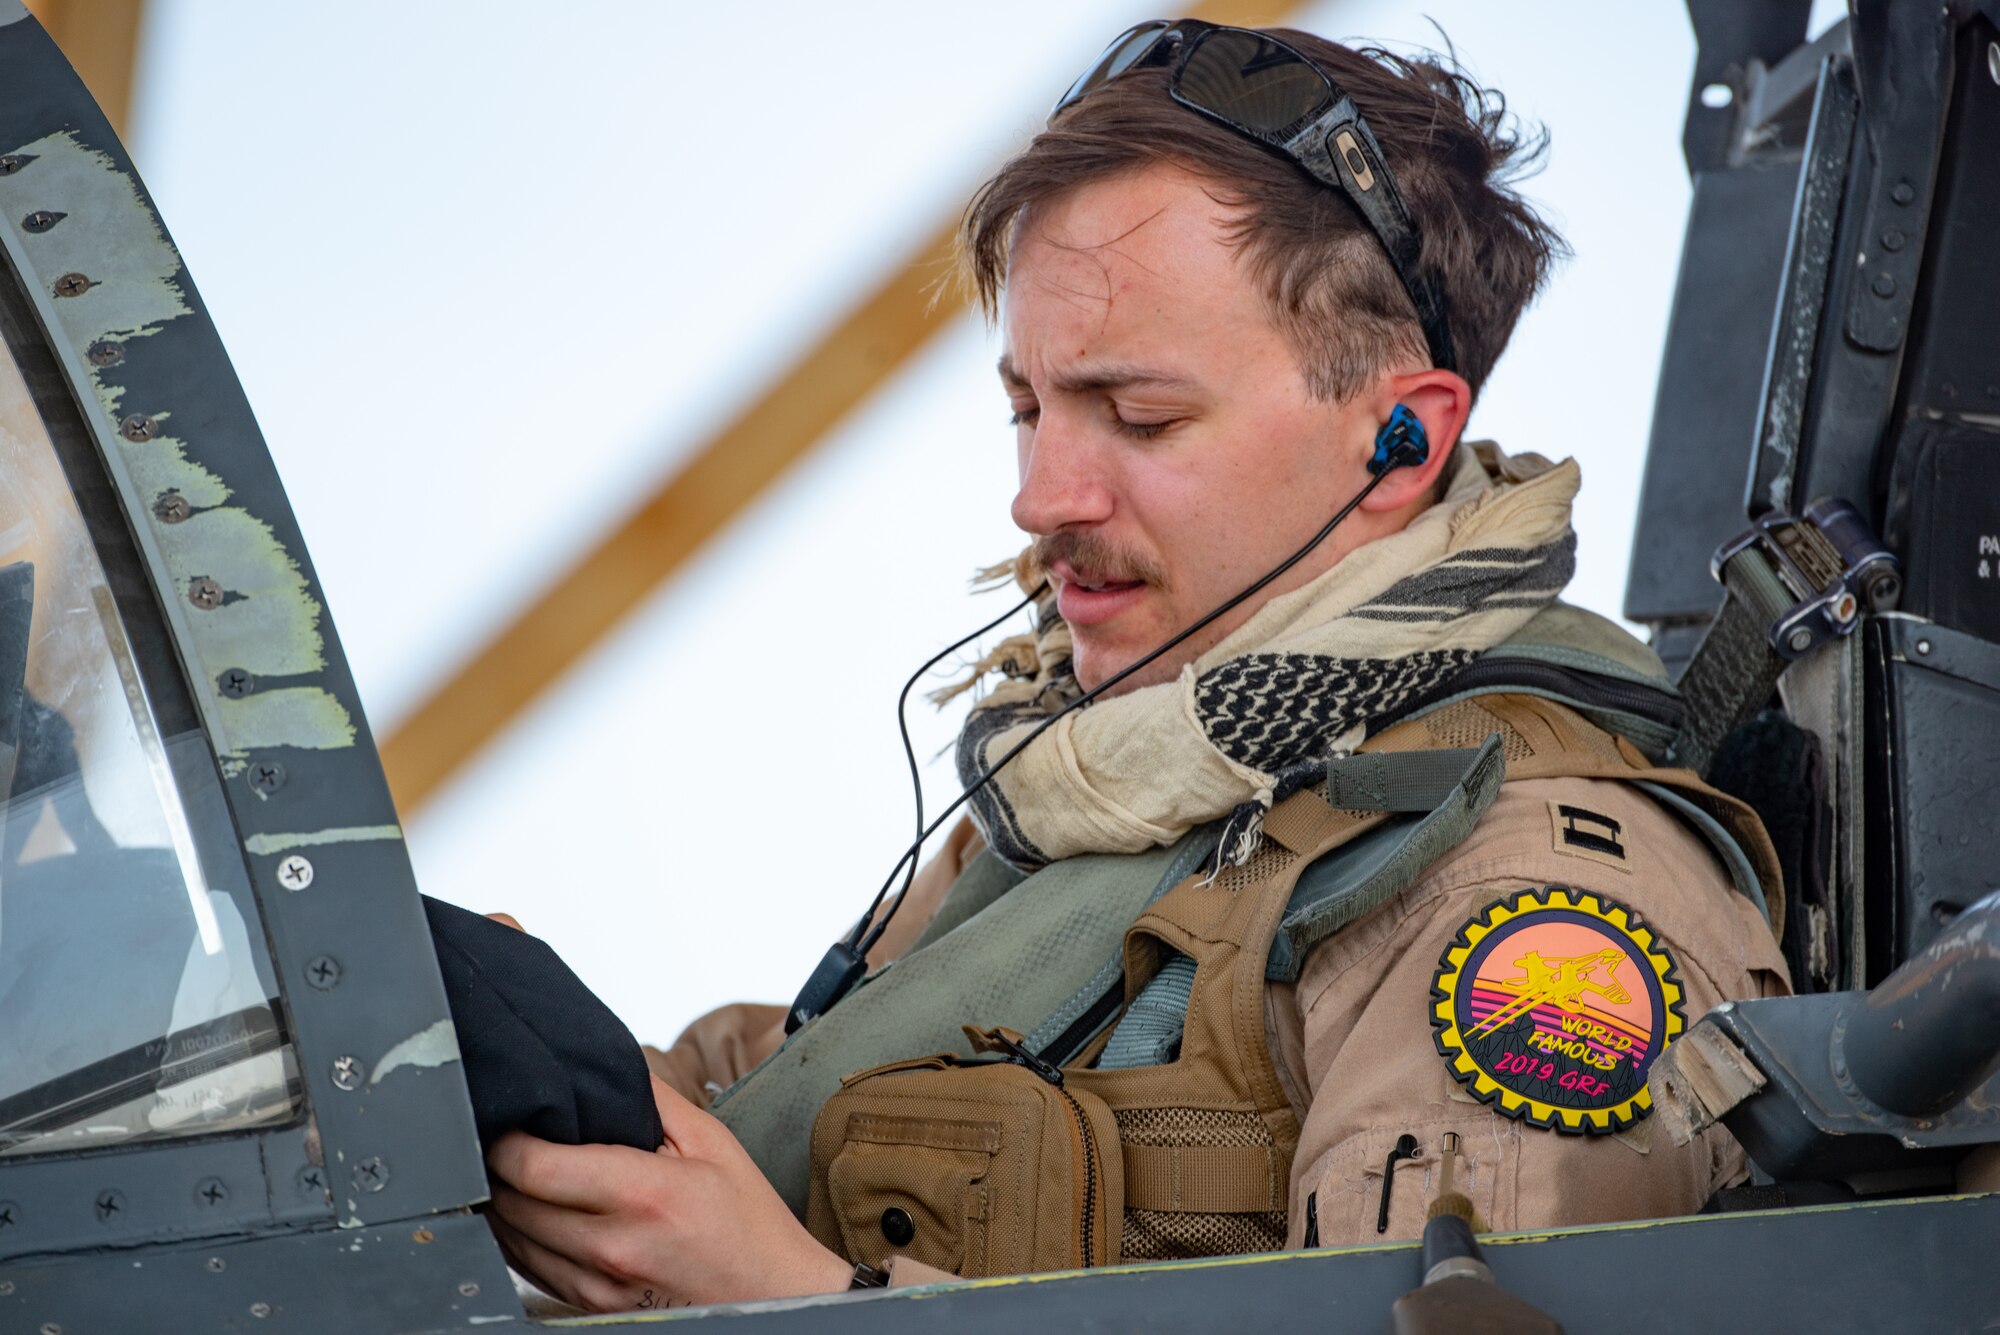 Capt. “Spear” Del Ponte, 336th Expeditionary Fighter Squadron pilot, prepares for flight for Agile Strike Sept. 18, 2019, at Al Dhafra Air Base, United Arab Emirates. The 336th EFS sent two aircraft and personnel to operate missions out of Prince Sultan Air Base, Saudi Arabia to challenge their flexibility at expanding tactical and strategic reach while strengthening coalition and regional partnerships in the Air Forces Central Command area of responsibility through adaptive basing. (U.S. Air Force photo by Staff Sgt. Chris Thornbury)